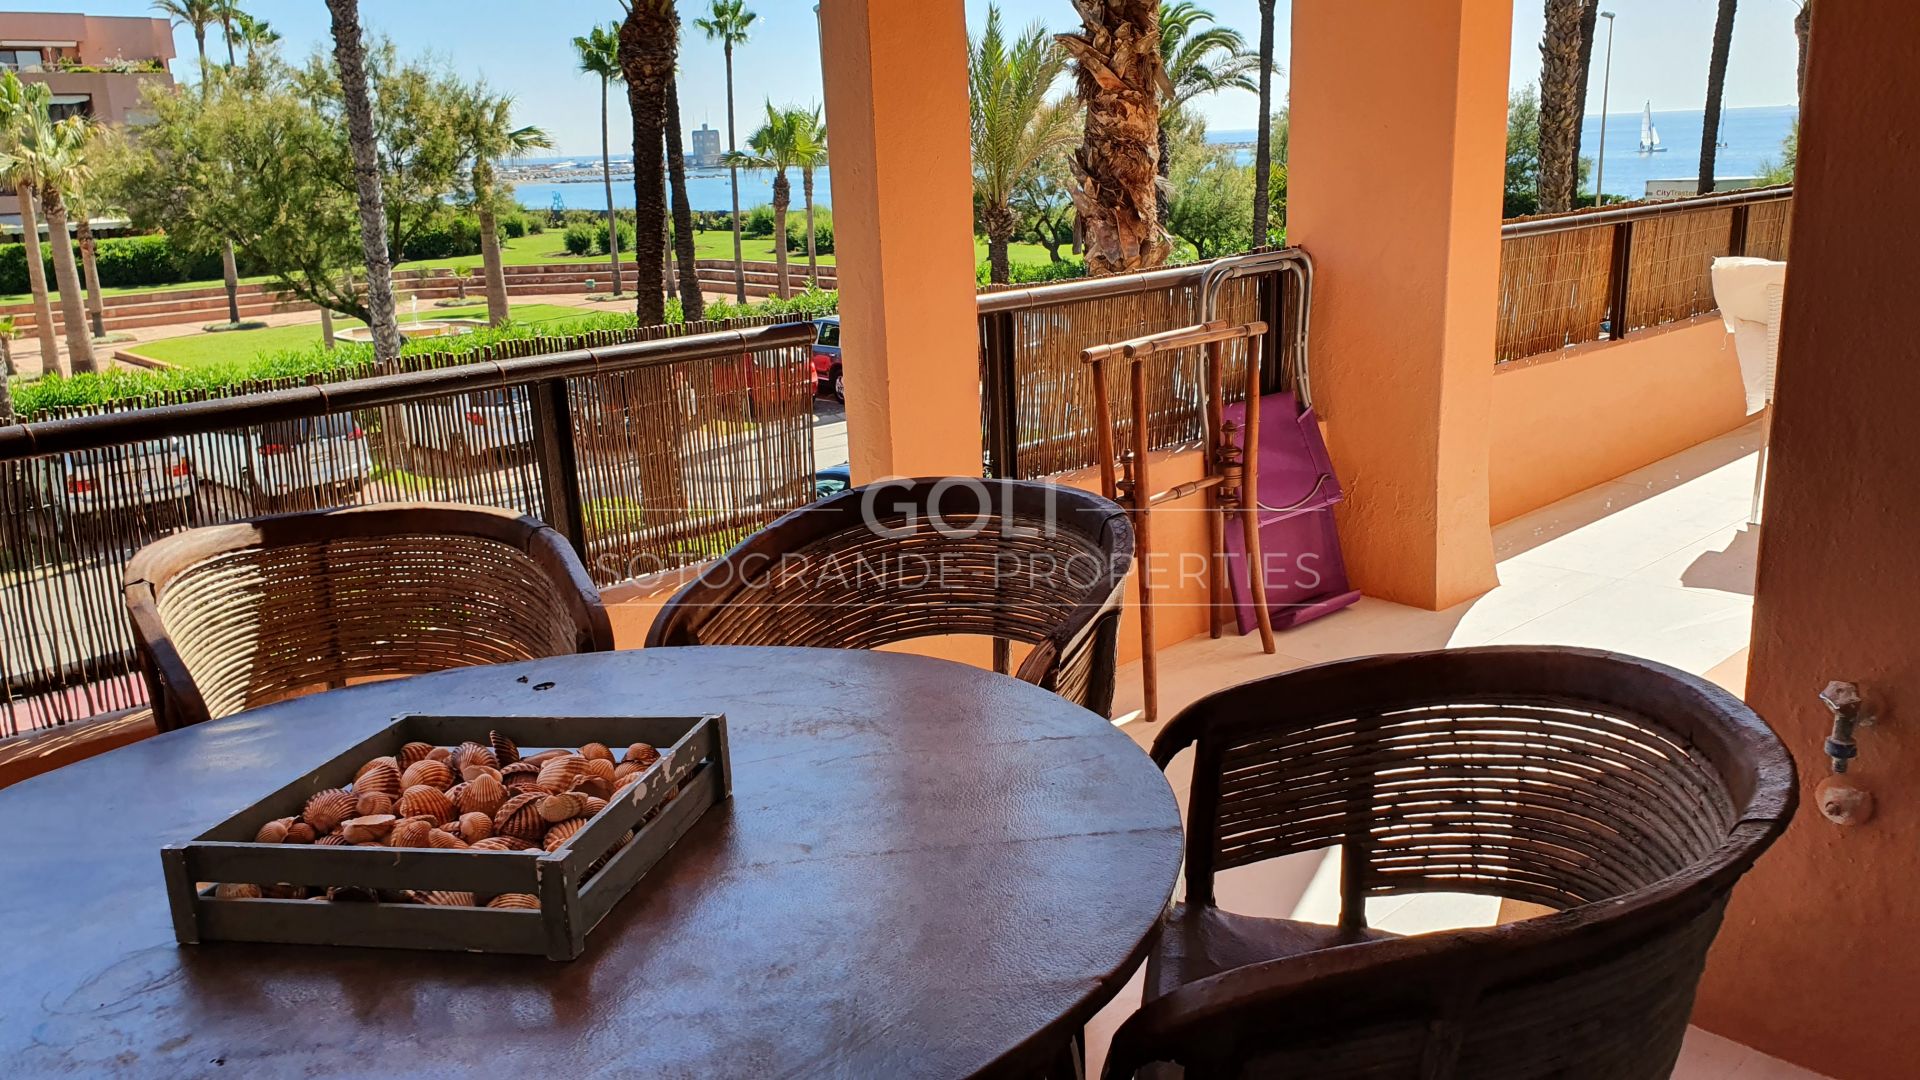 3 bedrooms apartment near the beach